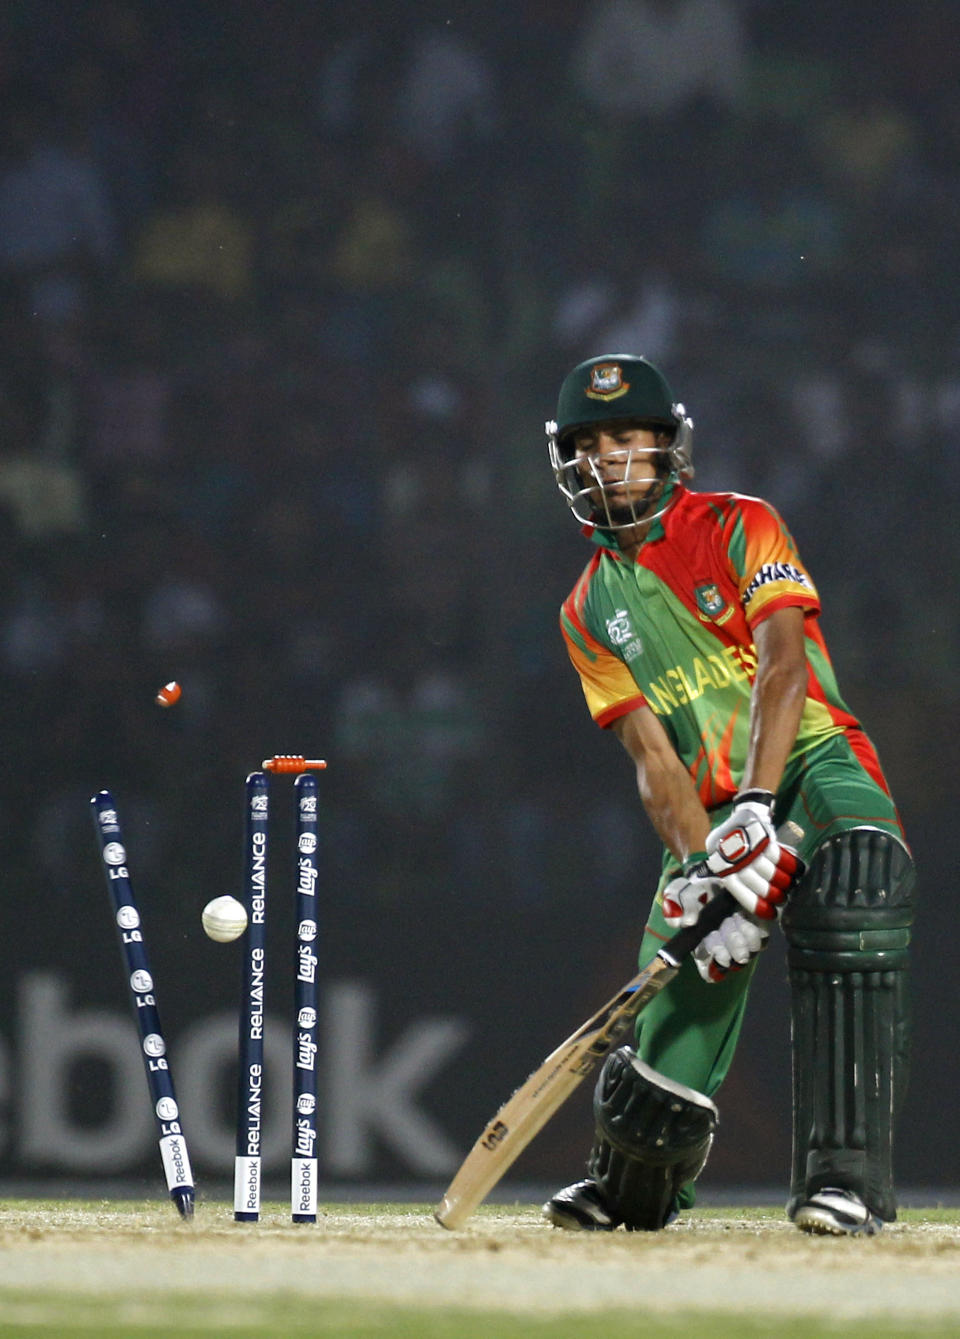 The bails fly off the wickets to dismiss Bangladeshi cricketer Nasir Hossain during a warm-up cricket match against United Arab Emirates ahead of the Twenty20 World Cup Cricket in Fatullah, near Dhaka, Bangladesh, Wednesday, March 12, 2014. (AP Photo/A.M. Ahad)